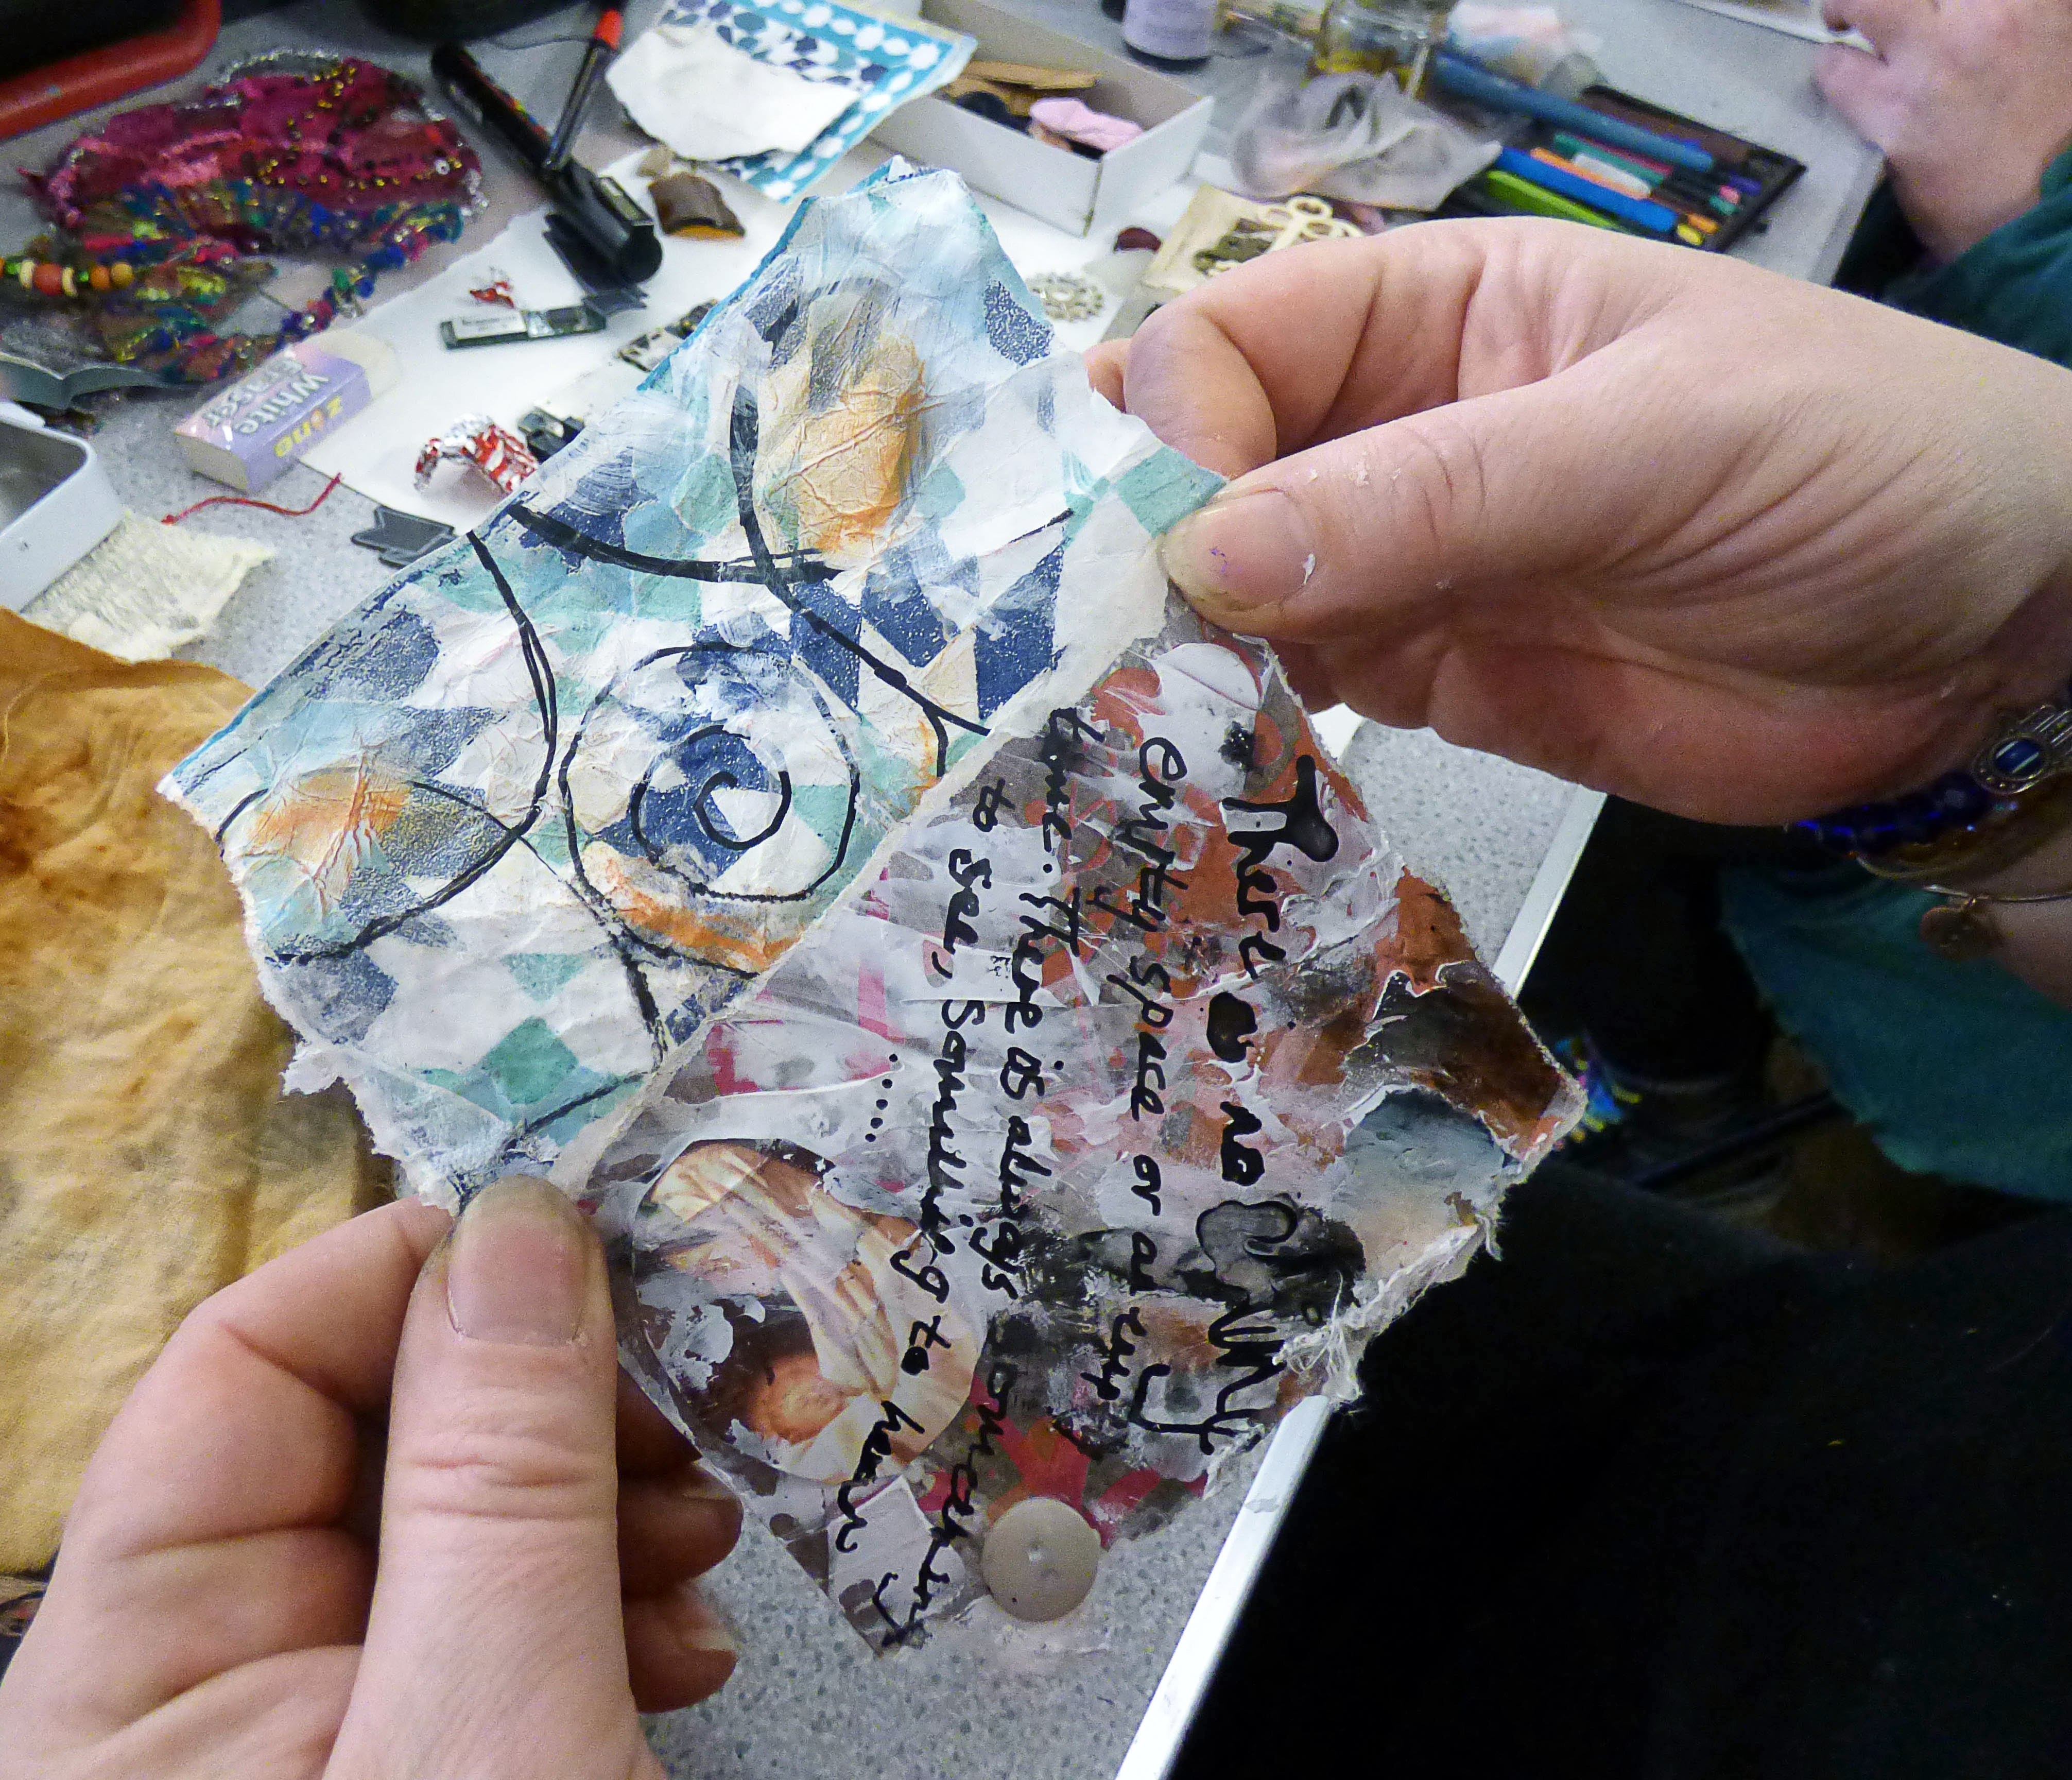 students work at "Fabulous Fragments" workshop with Shelley Rhodes 2017